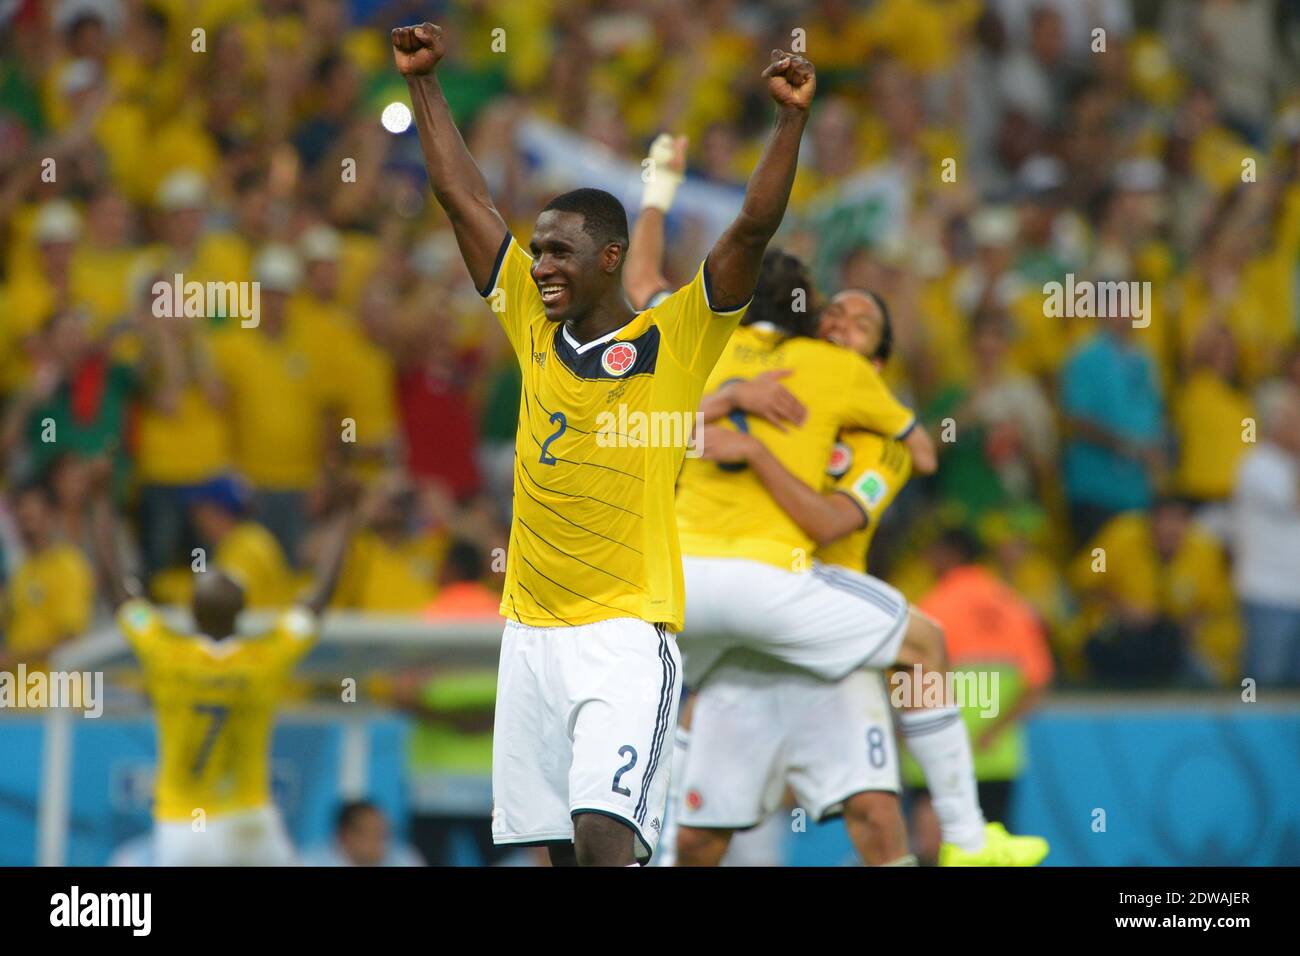 Colombia's Cristian Zapata during Soccer World Cup 2014 1/8 of final round match Colombia v Uruguay at Maracana Stadium, Rio de Janeiro, Brazil on June 28, 2014. Colombia won 2-0. Photo by Henri Szwarc/ABACAPRESS.COM Stock Photo